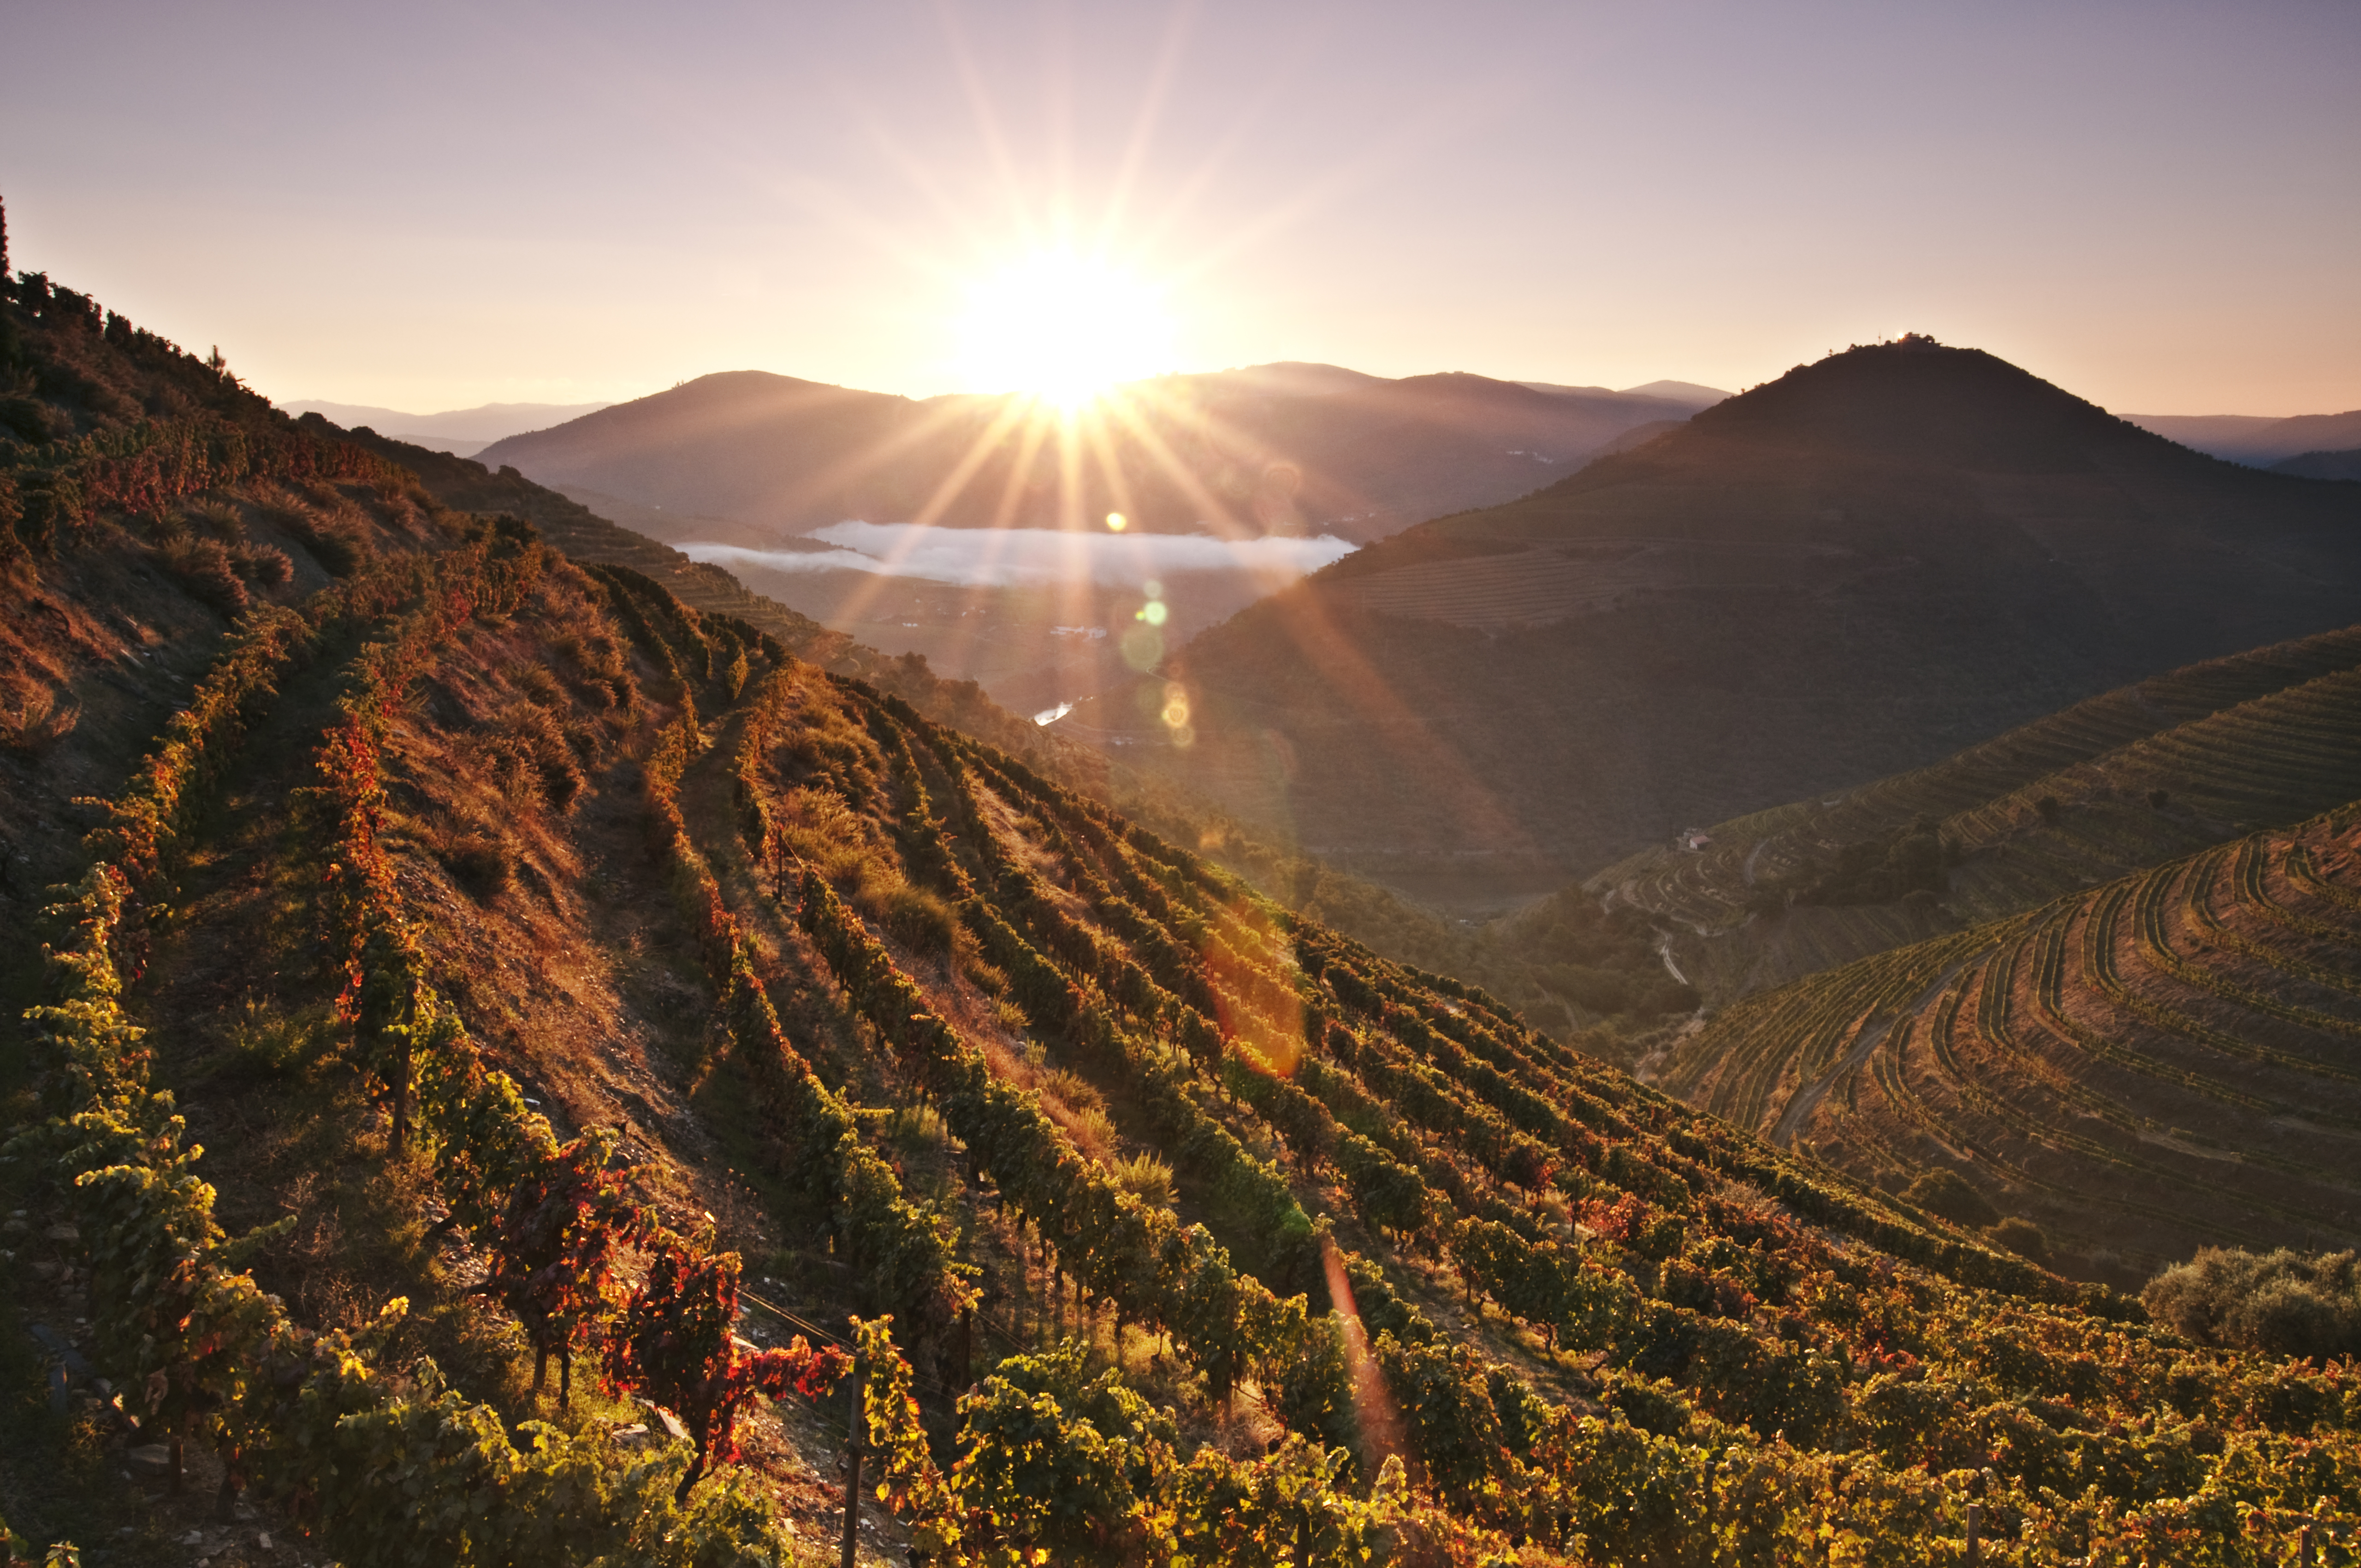 Why is the Douro such a special wine region?